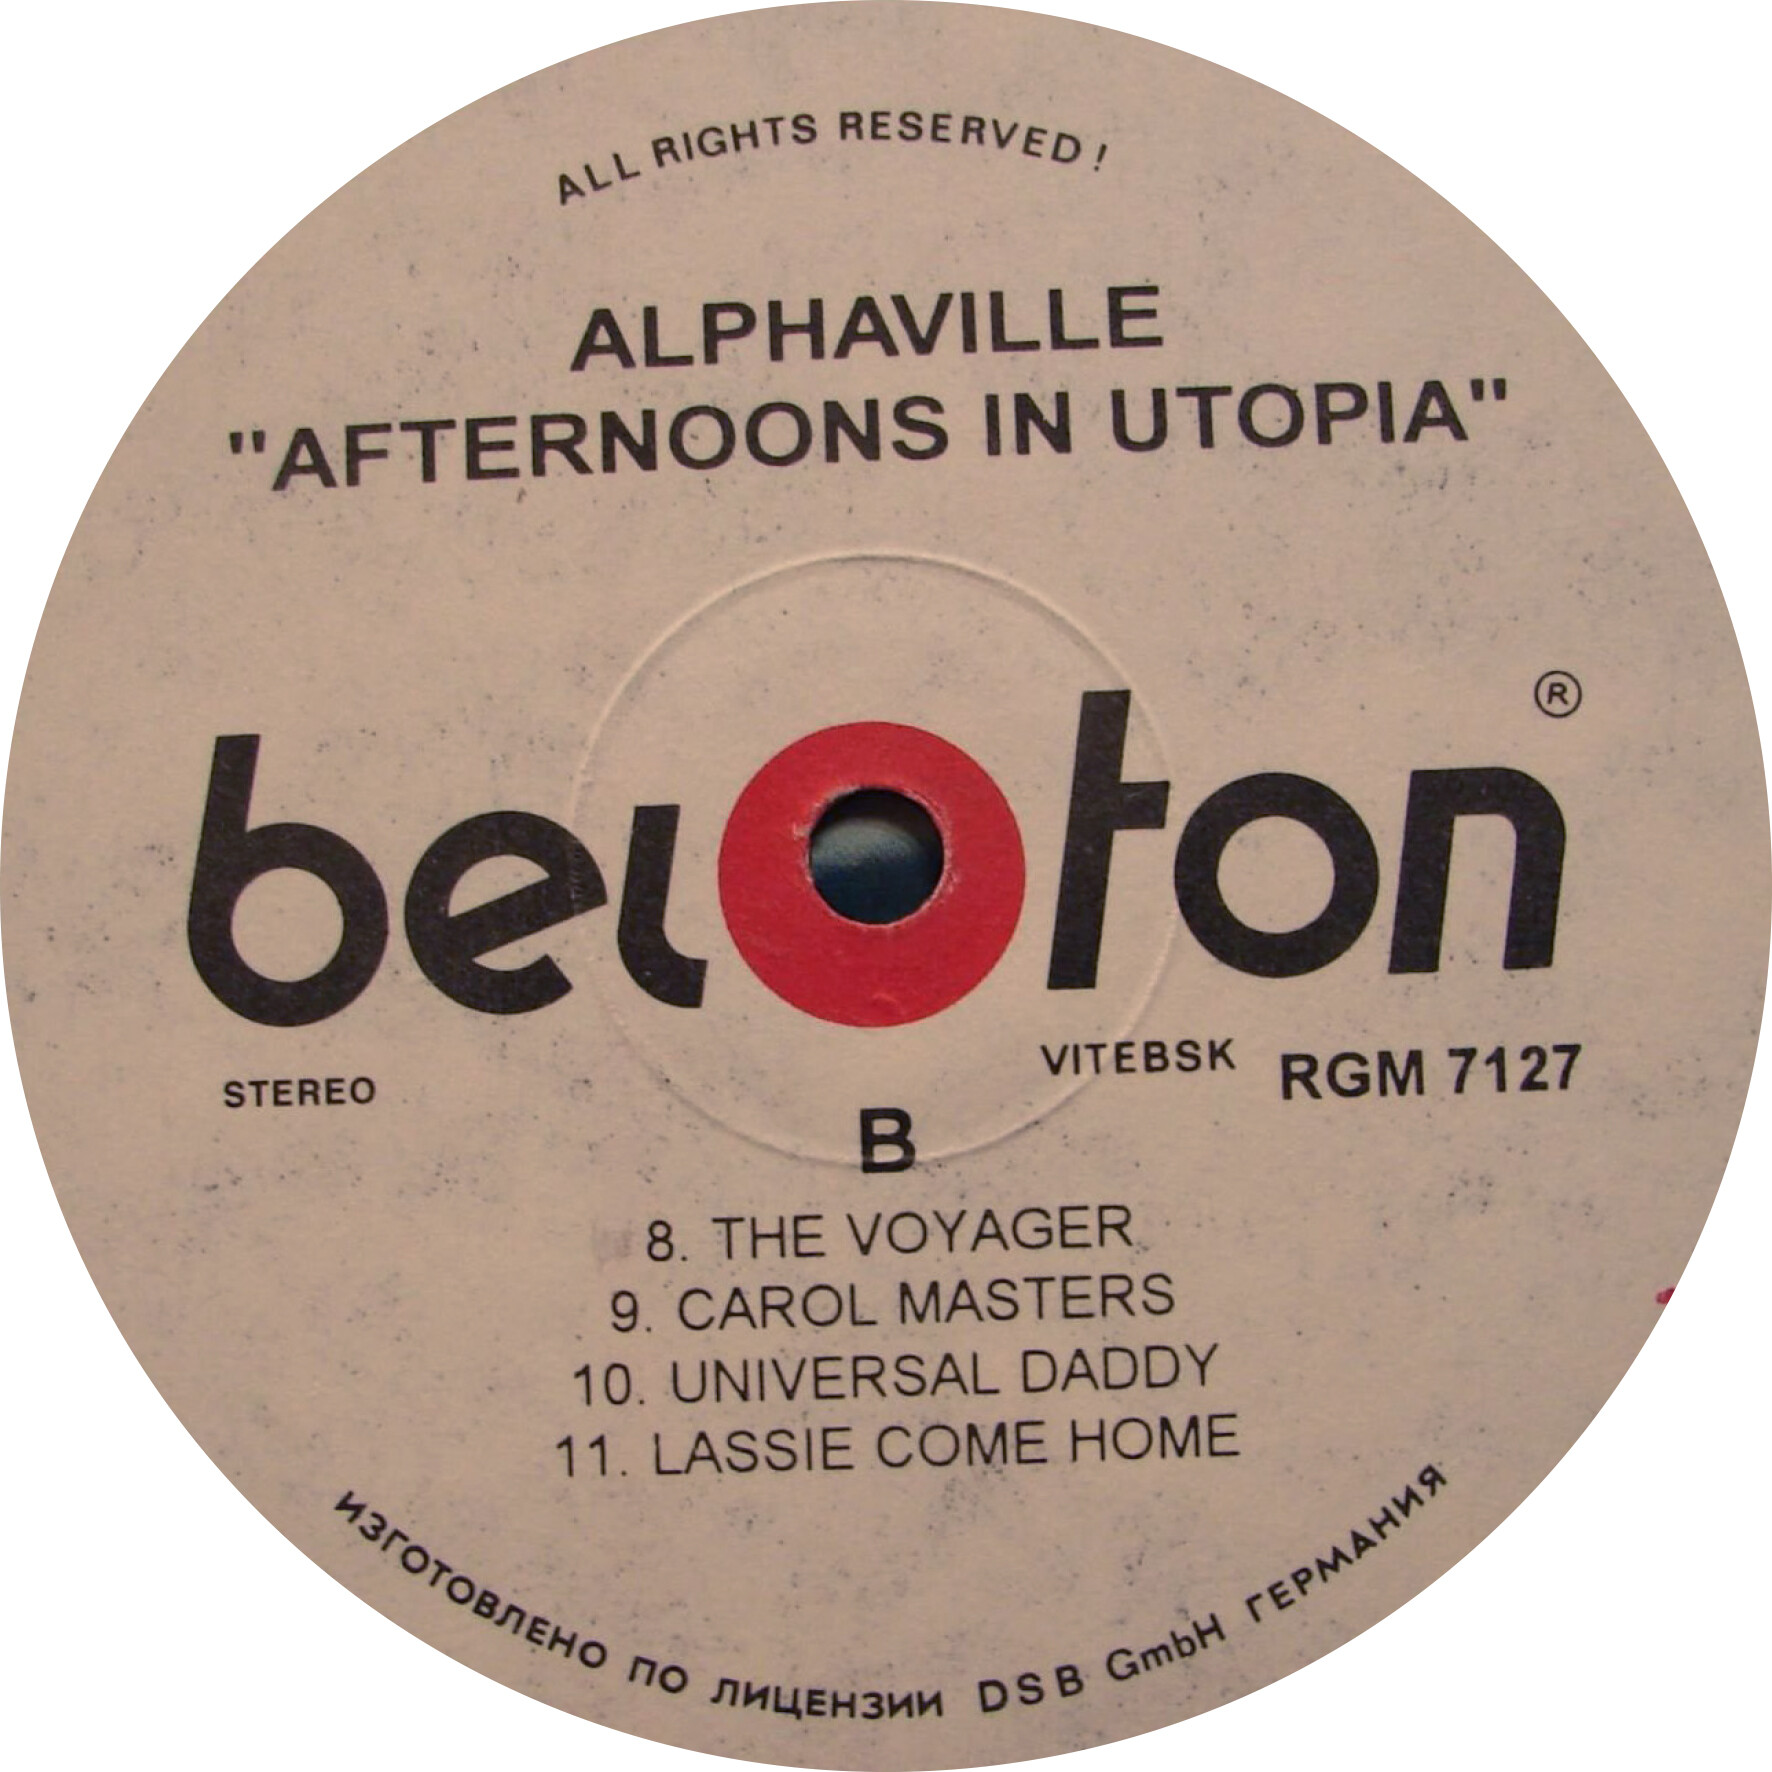 ALPHAVILLE. Afternoons In Utopia